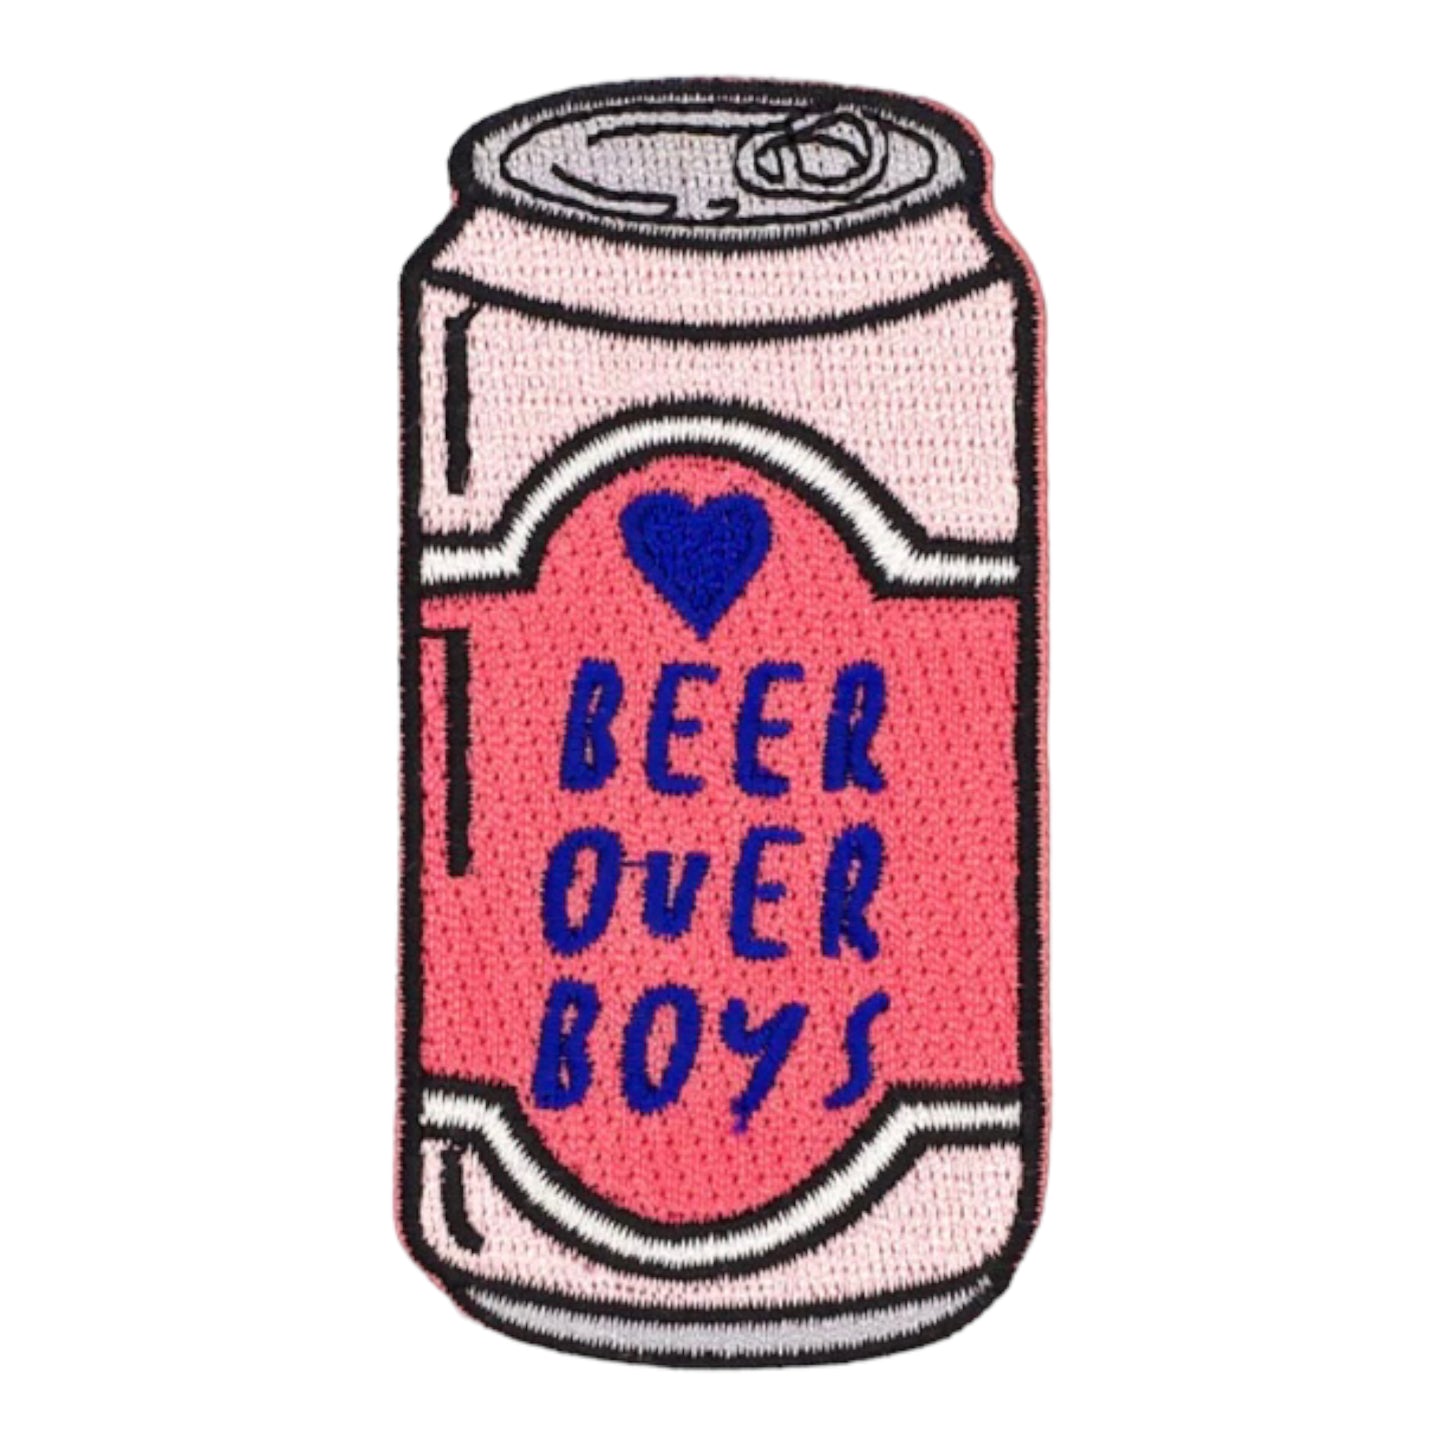 Beer Over Boys Iron on Patch